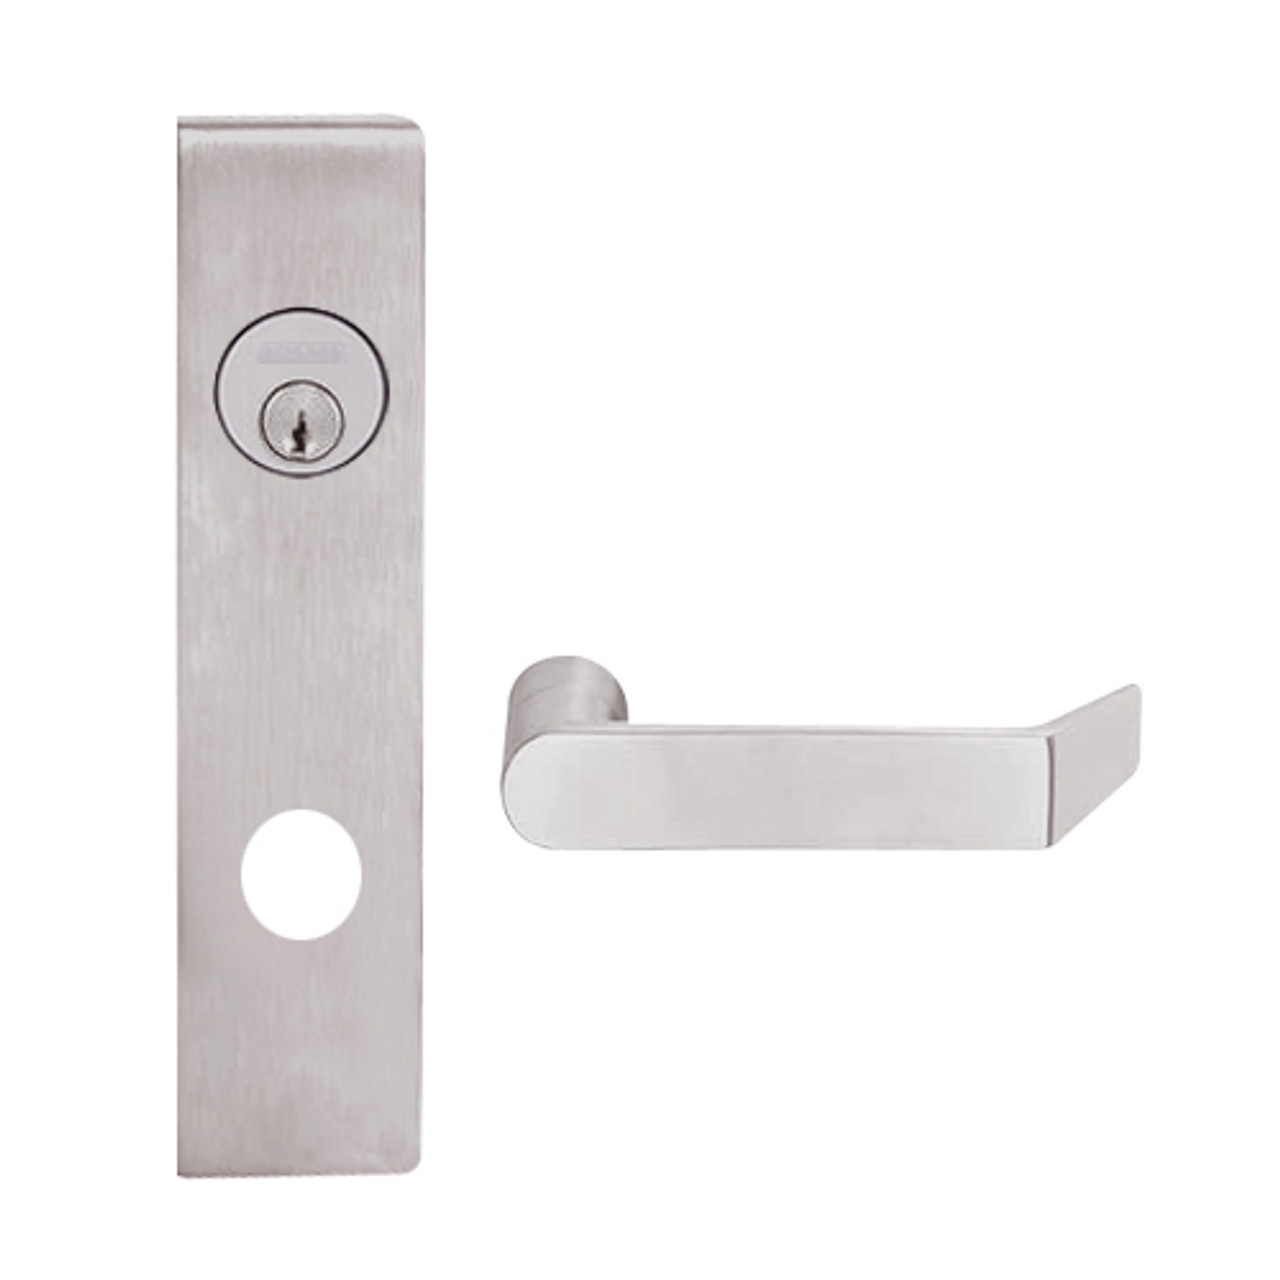 L9456P-06L-630 Schlage L Series Corridor with Deadbolt Commercial Mortise Lock with 06 Cast Lever Design in Satin Stainless Steel